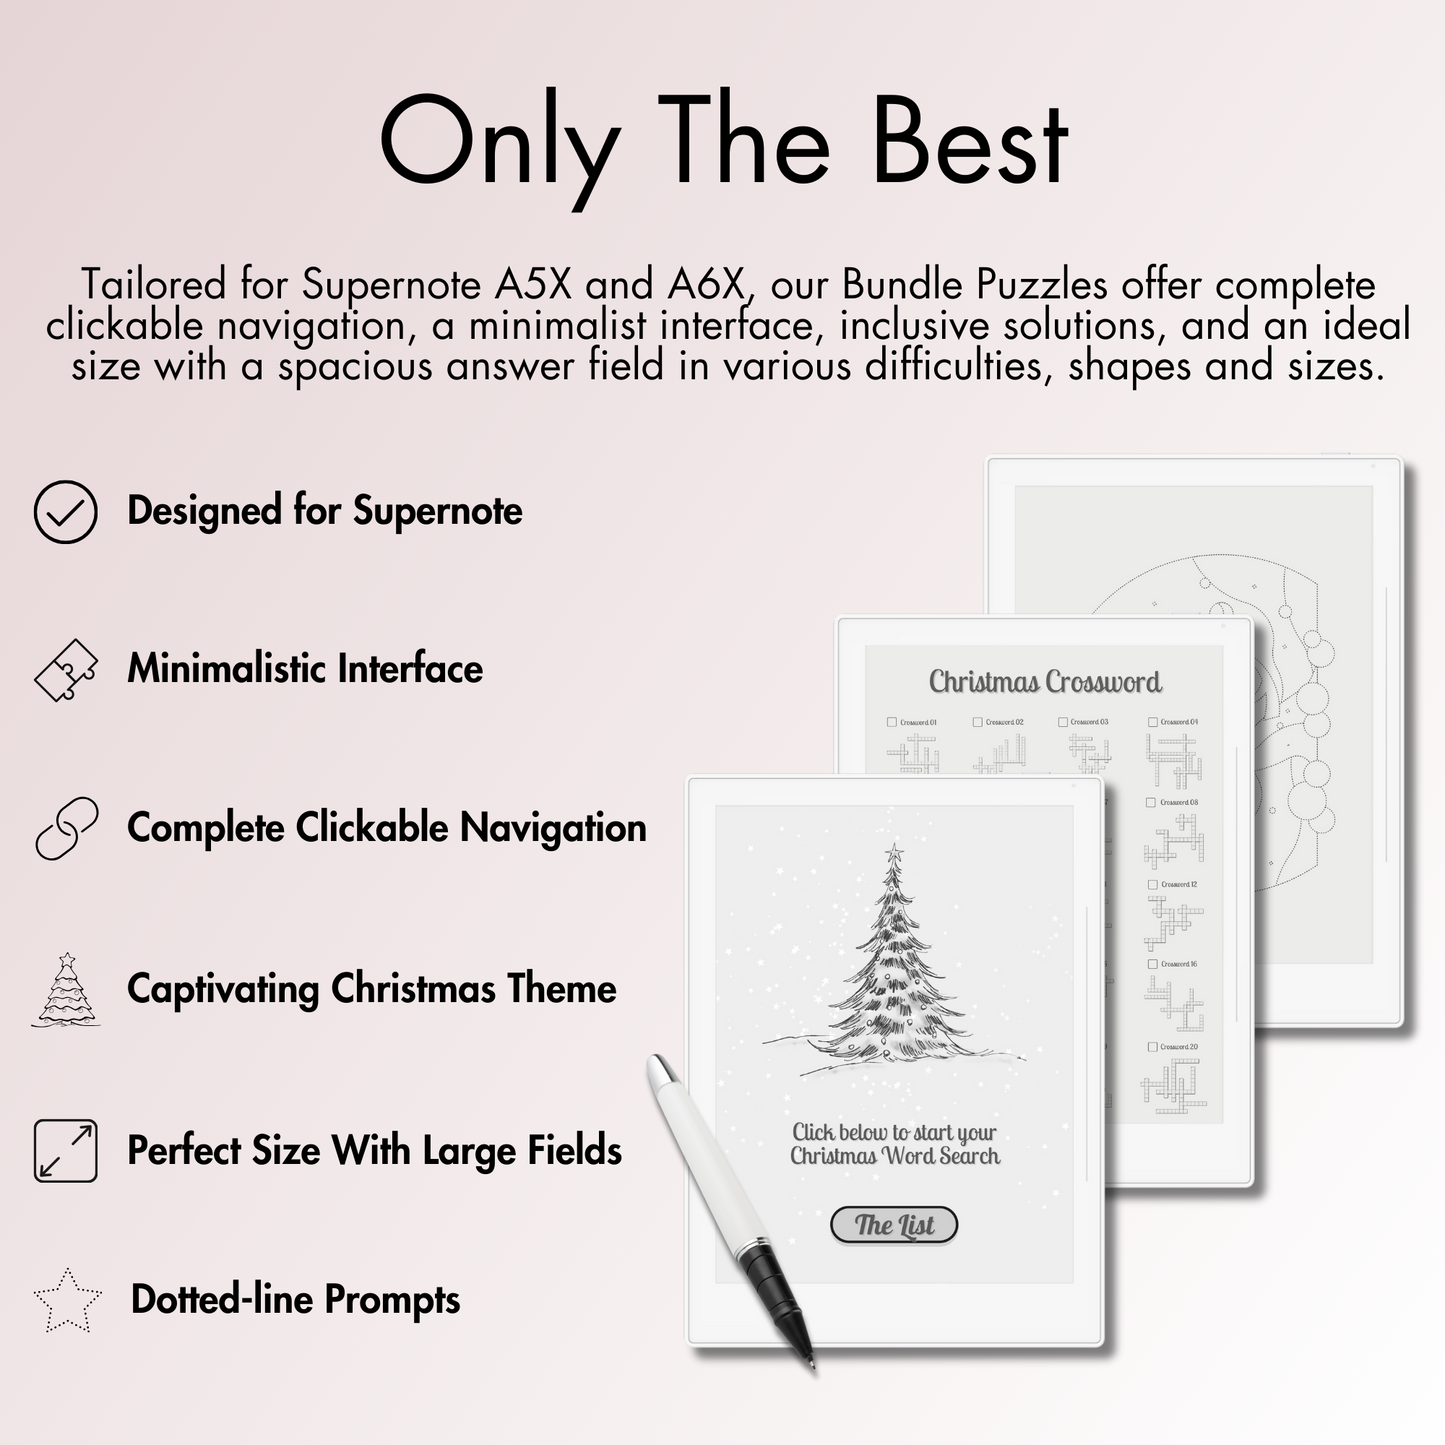 The Bundle offers complete clickable navigation, a minimalist interface, inclusive solutions, and an ideal size with a spacious answer field in various holiday-themed difficulties, shapes, and sizes for Supernote A5X and A6X's e-ink screen, perfect for adding festive cheer to your holiday season.